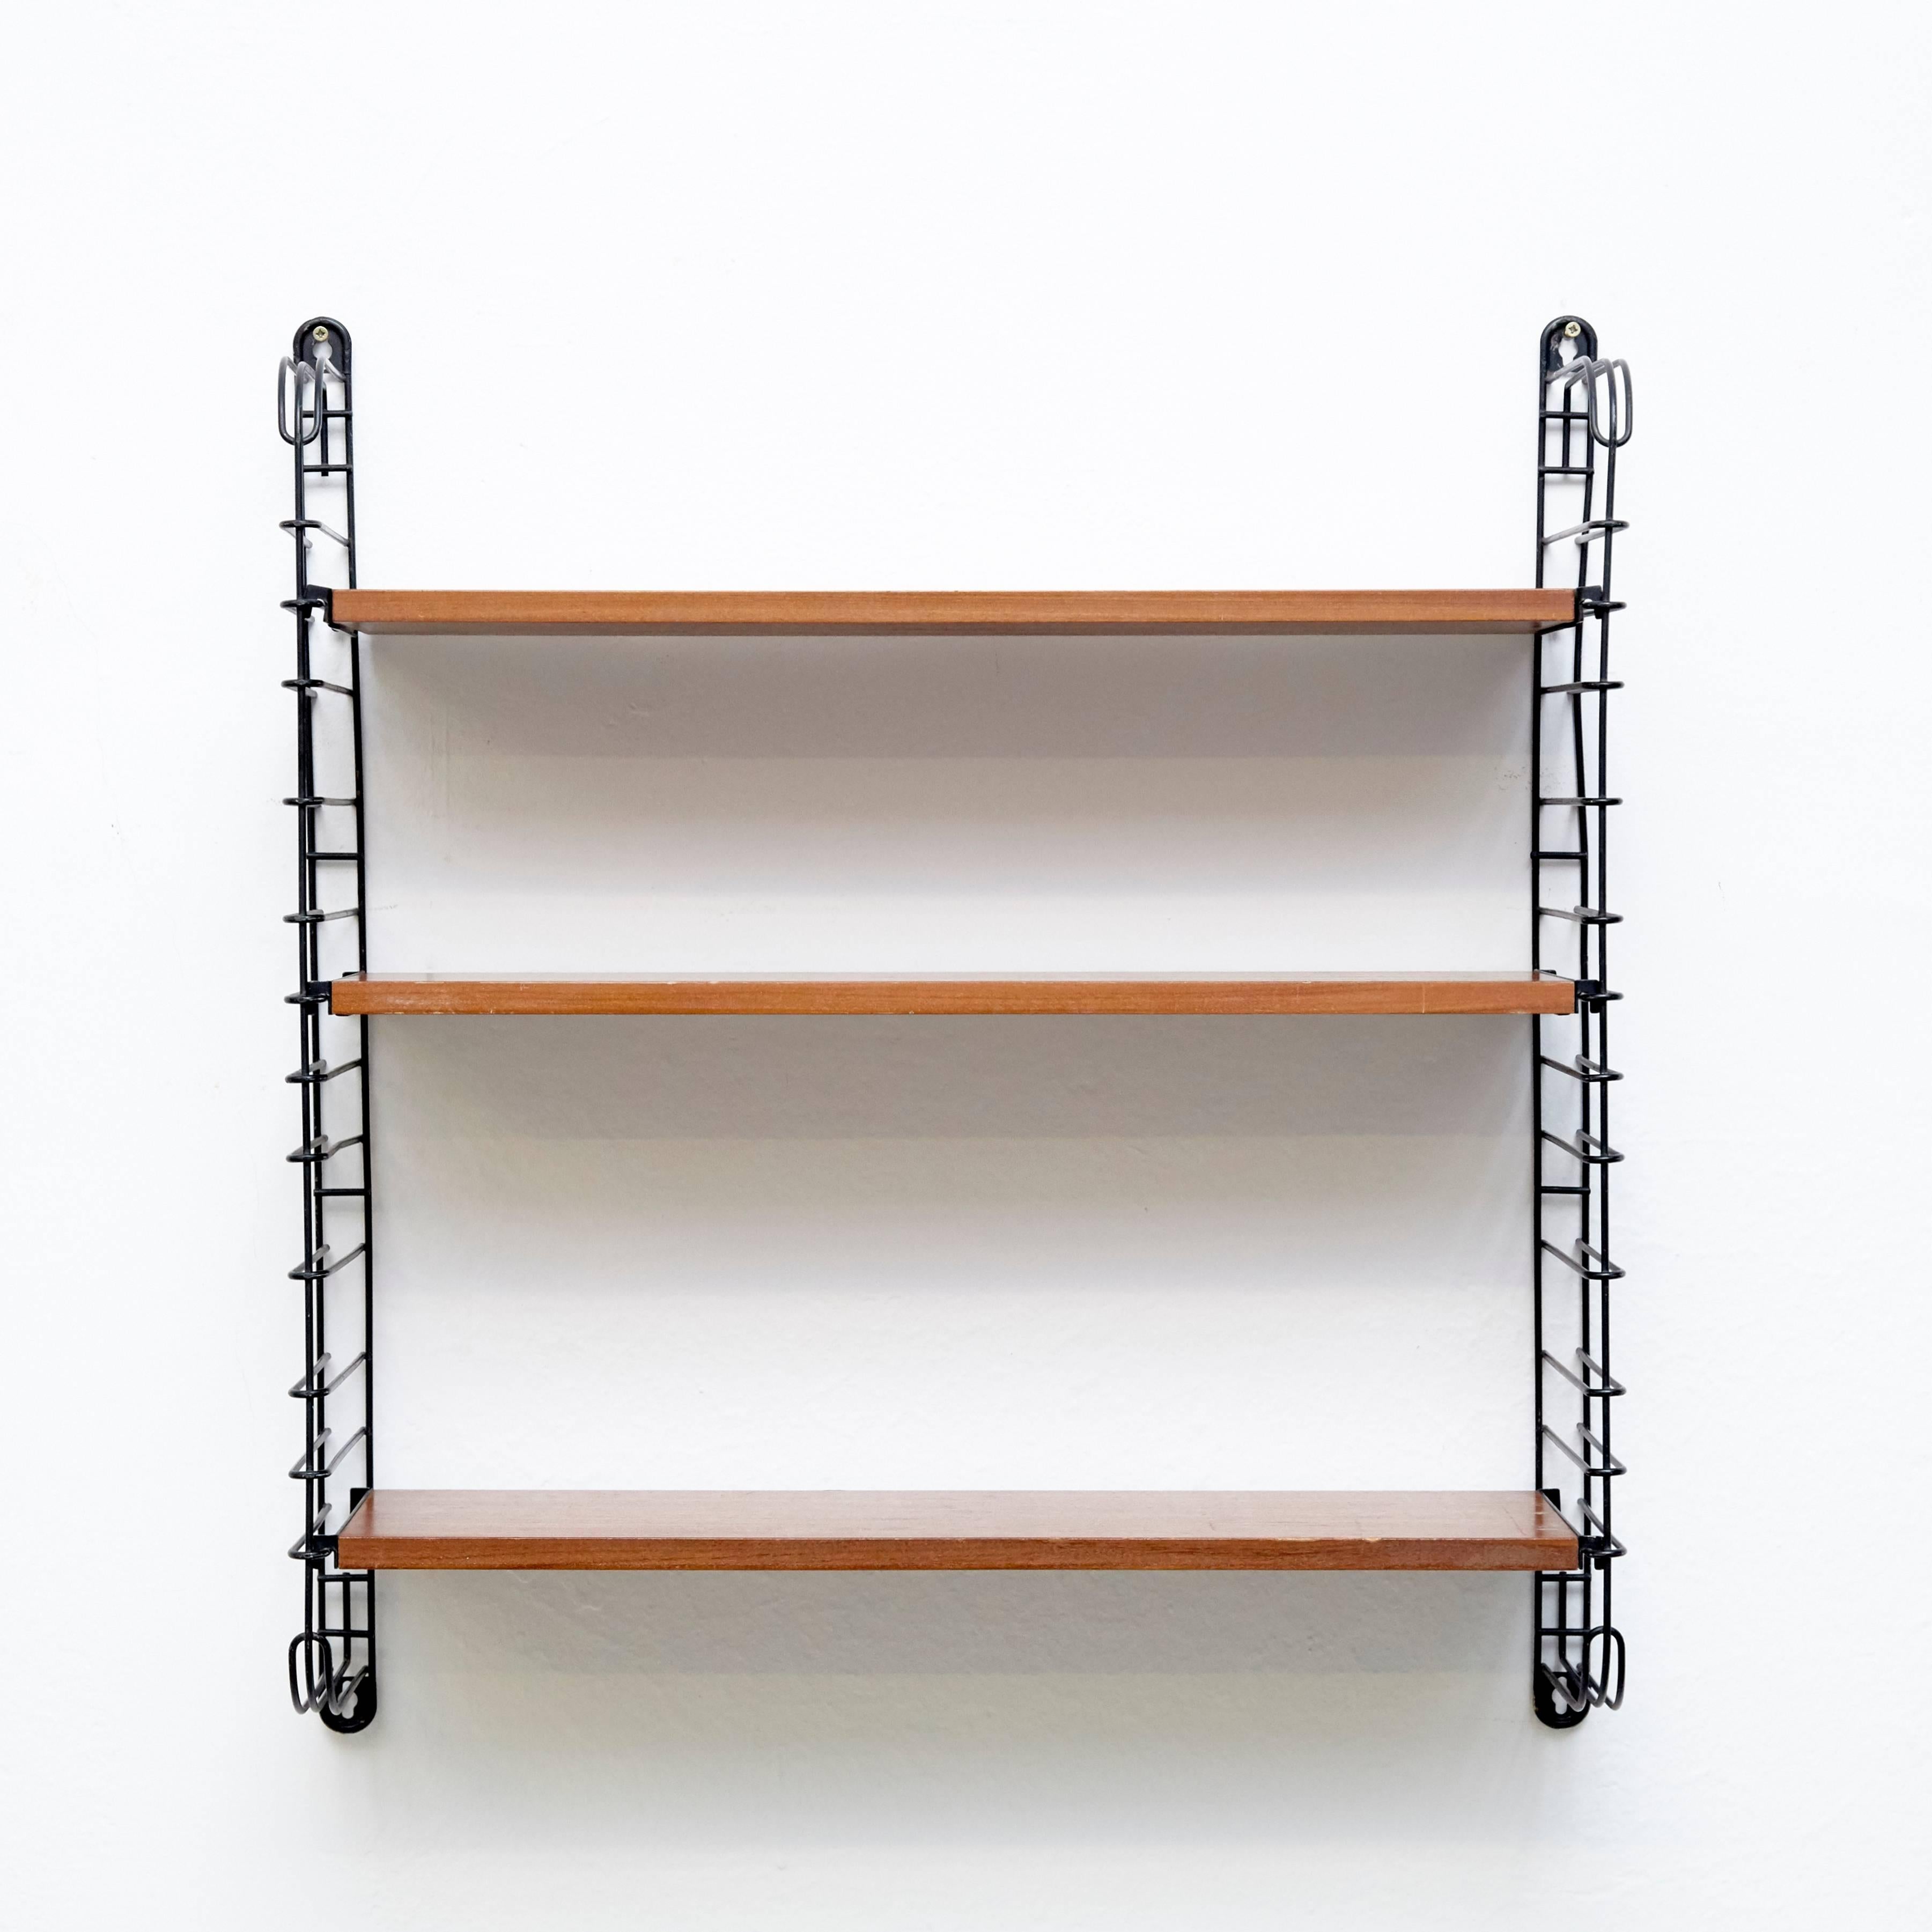 Modular shelves designed by Adriaan D. Dekker in 1958.
Manufactured by Tomado in the Netherlands.

It possible to fit multiple shelves together, thus achieving a personalized/modular shelving system.

In good original condition with minor wear